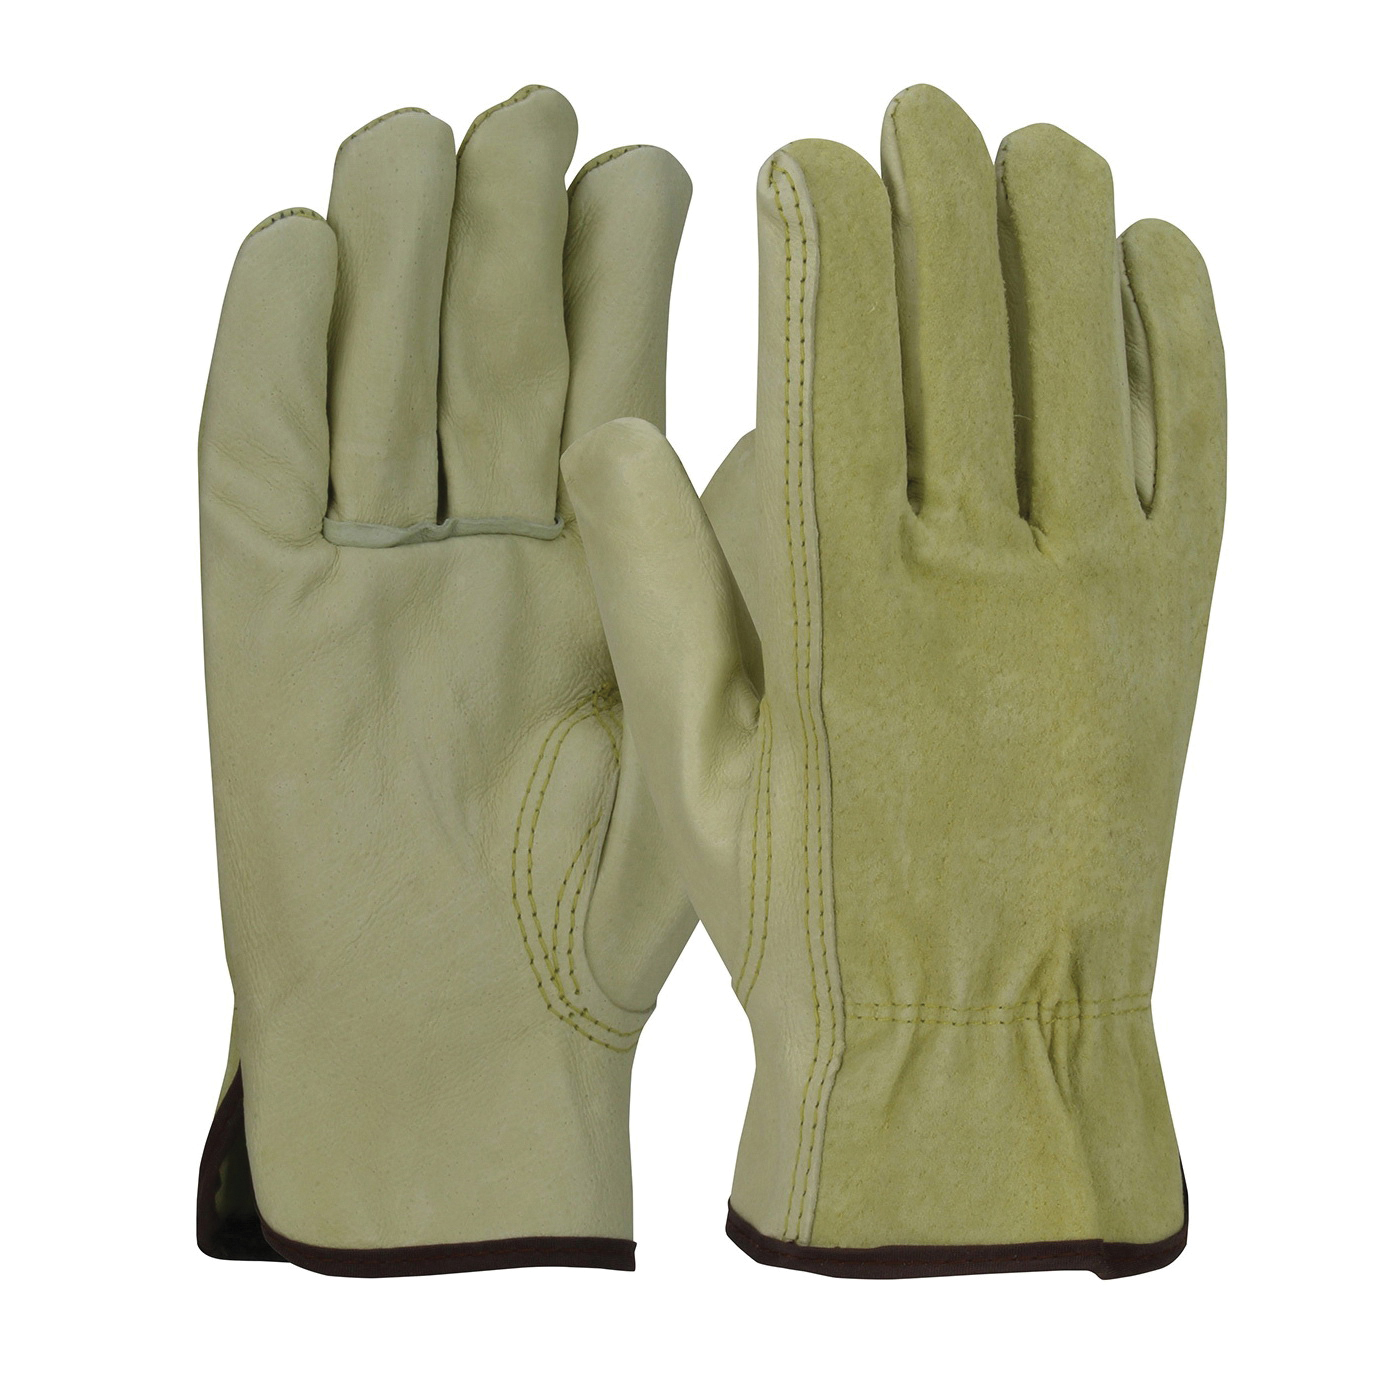 PIP® 70-360SB Industrial Grade General Purpose Gloves, Drivers, Top Grain Pigskin Leather Palm, Top Grain Pigskin Leather, Natural, Slip-On Cuff, Uncoated Coating, Resists: Moisture, Unlined Lining, Keystone Thumb